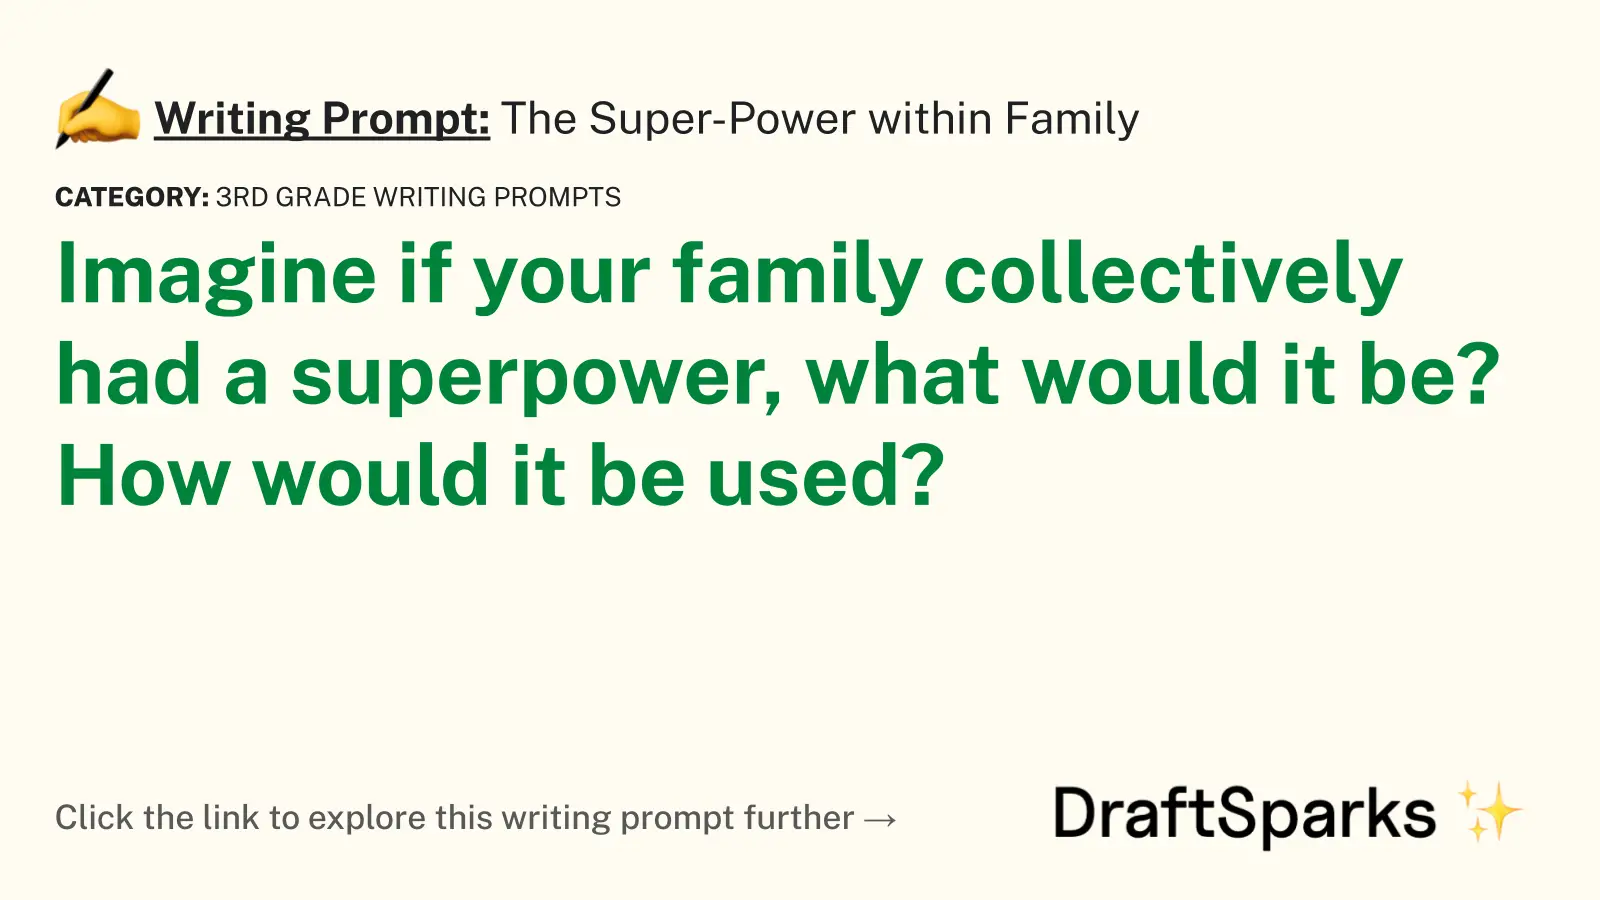 The Super-Power within Family